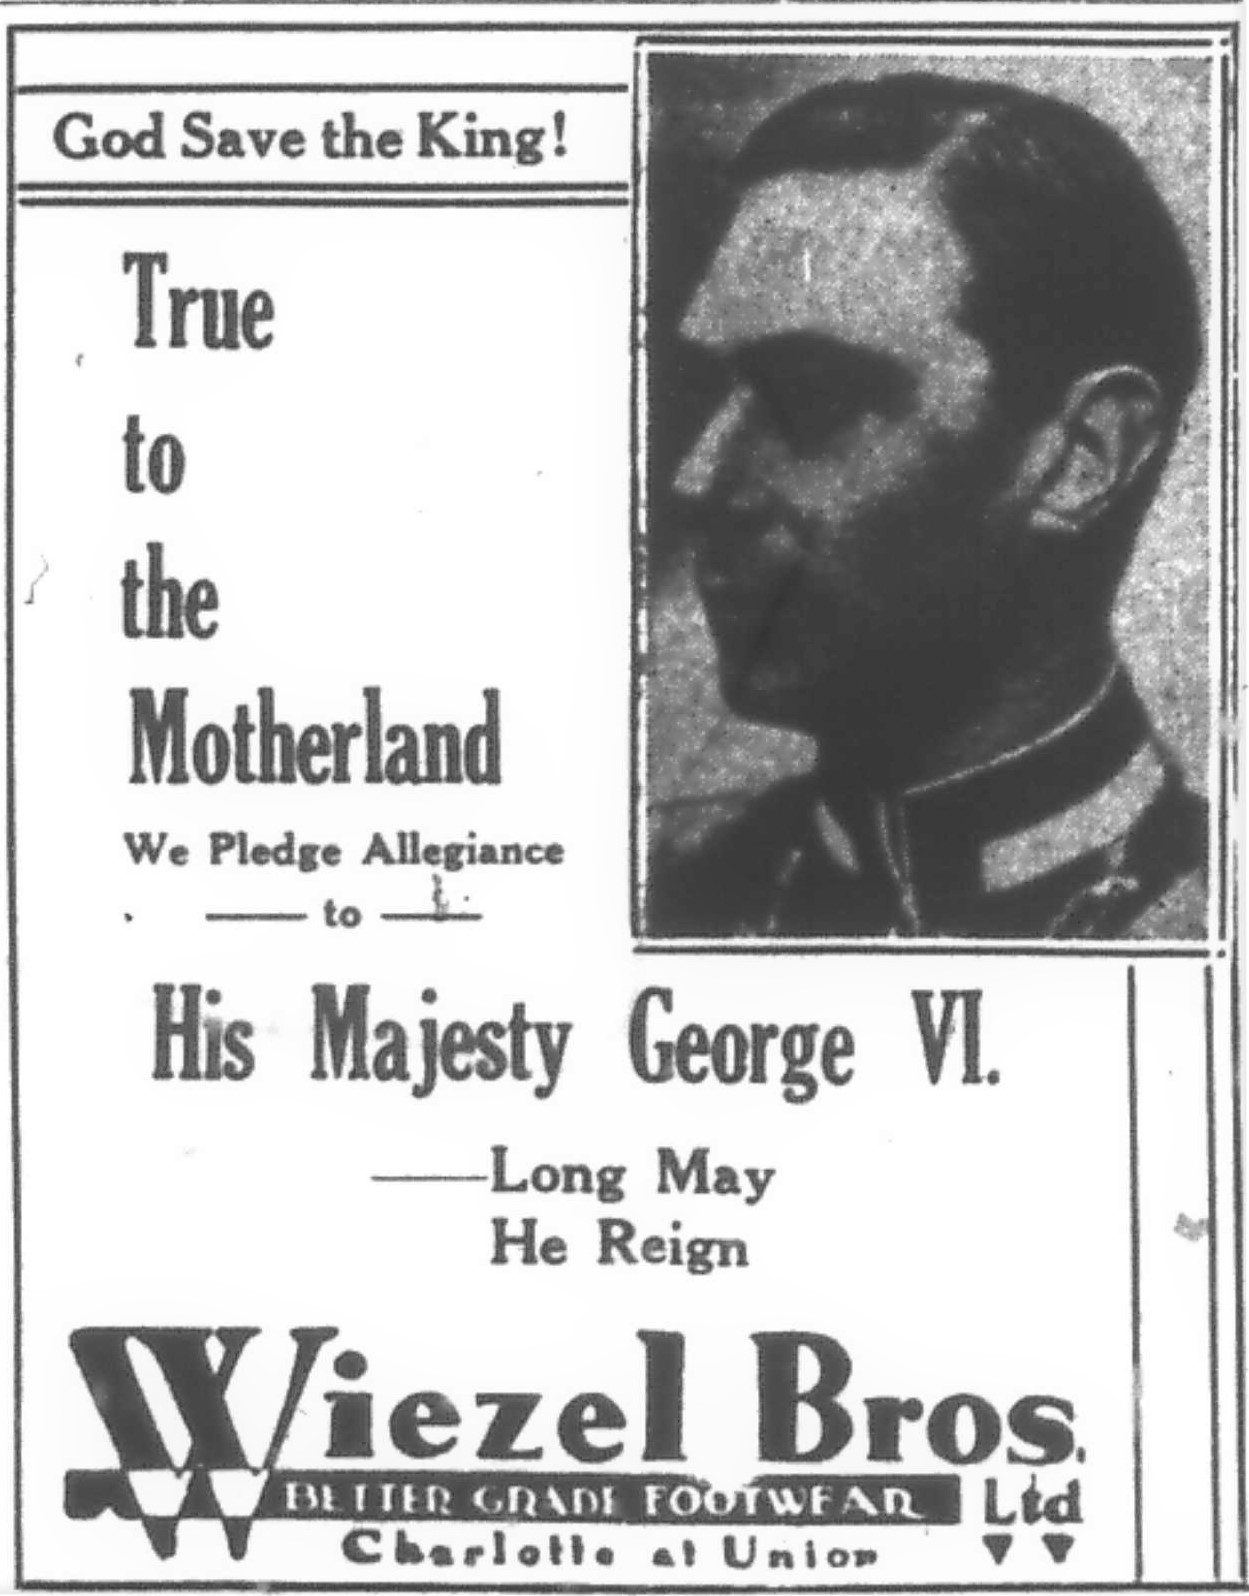 Newspaper advertisement – “God Save the King! True to the Motherland We Pledge Allegiance to His Majesty King George VI. Long May He Reign – Wiezel Bros.”